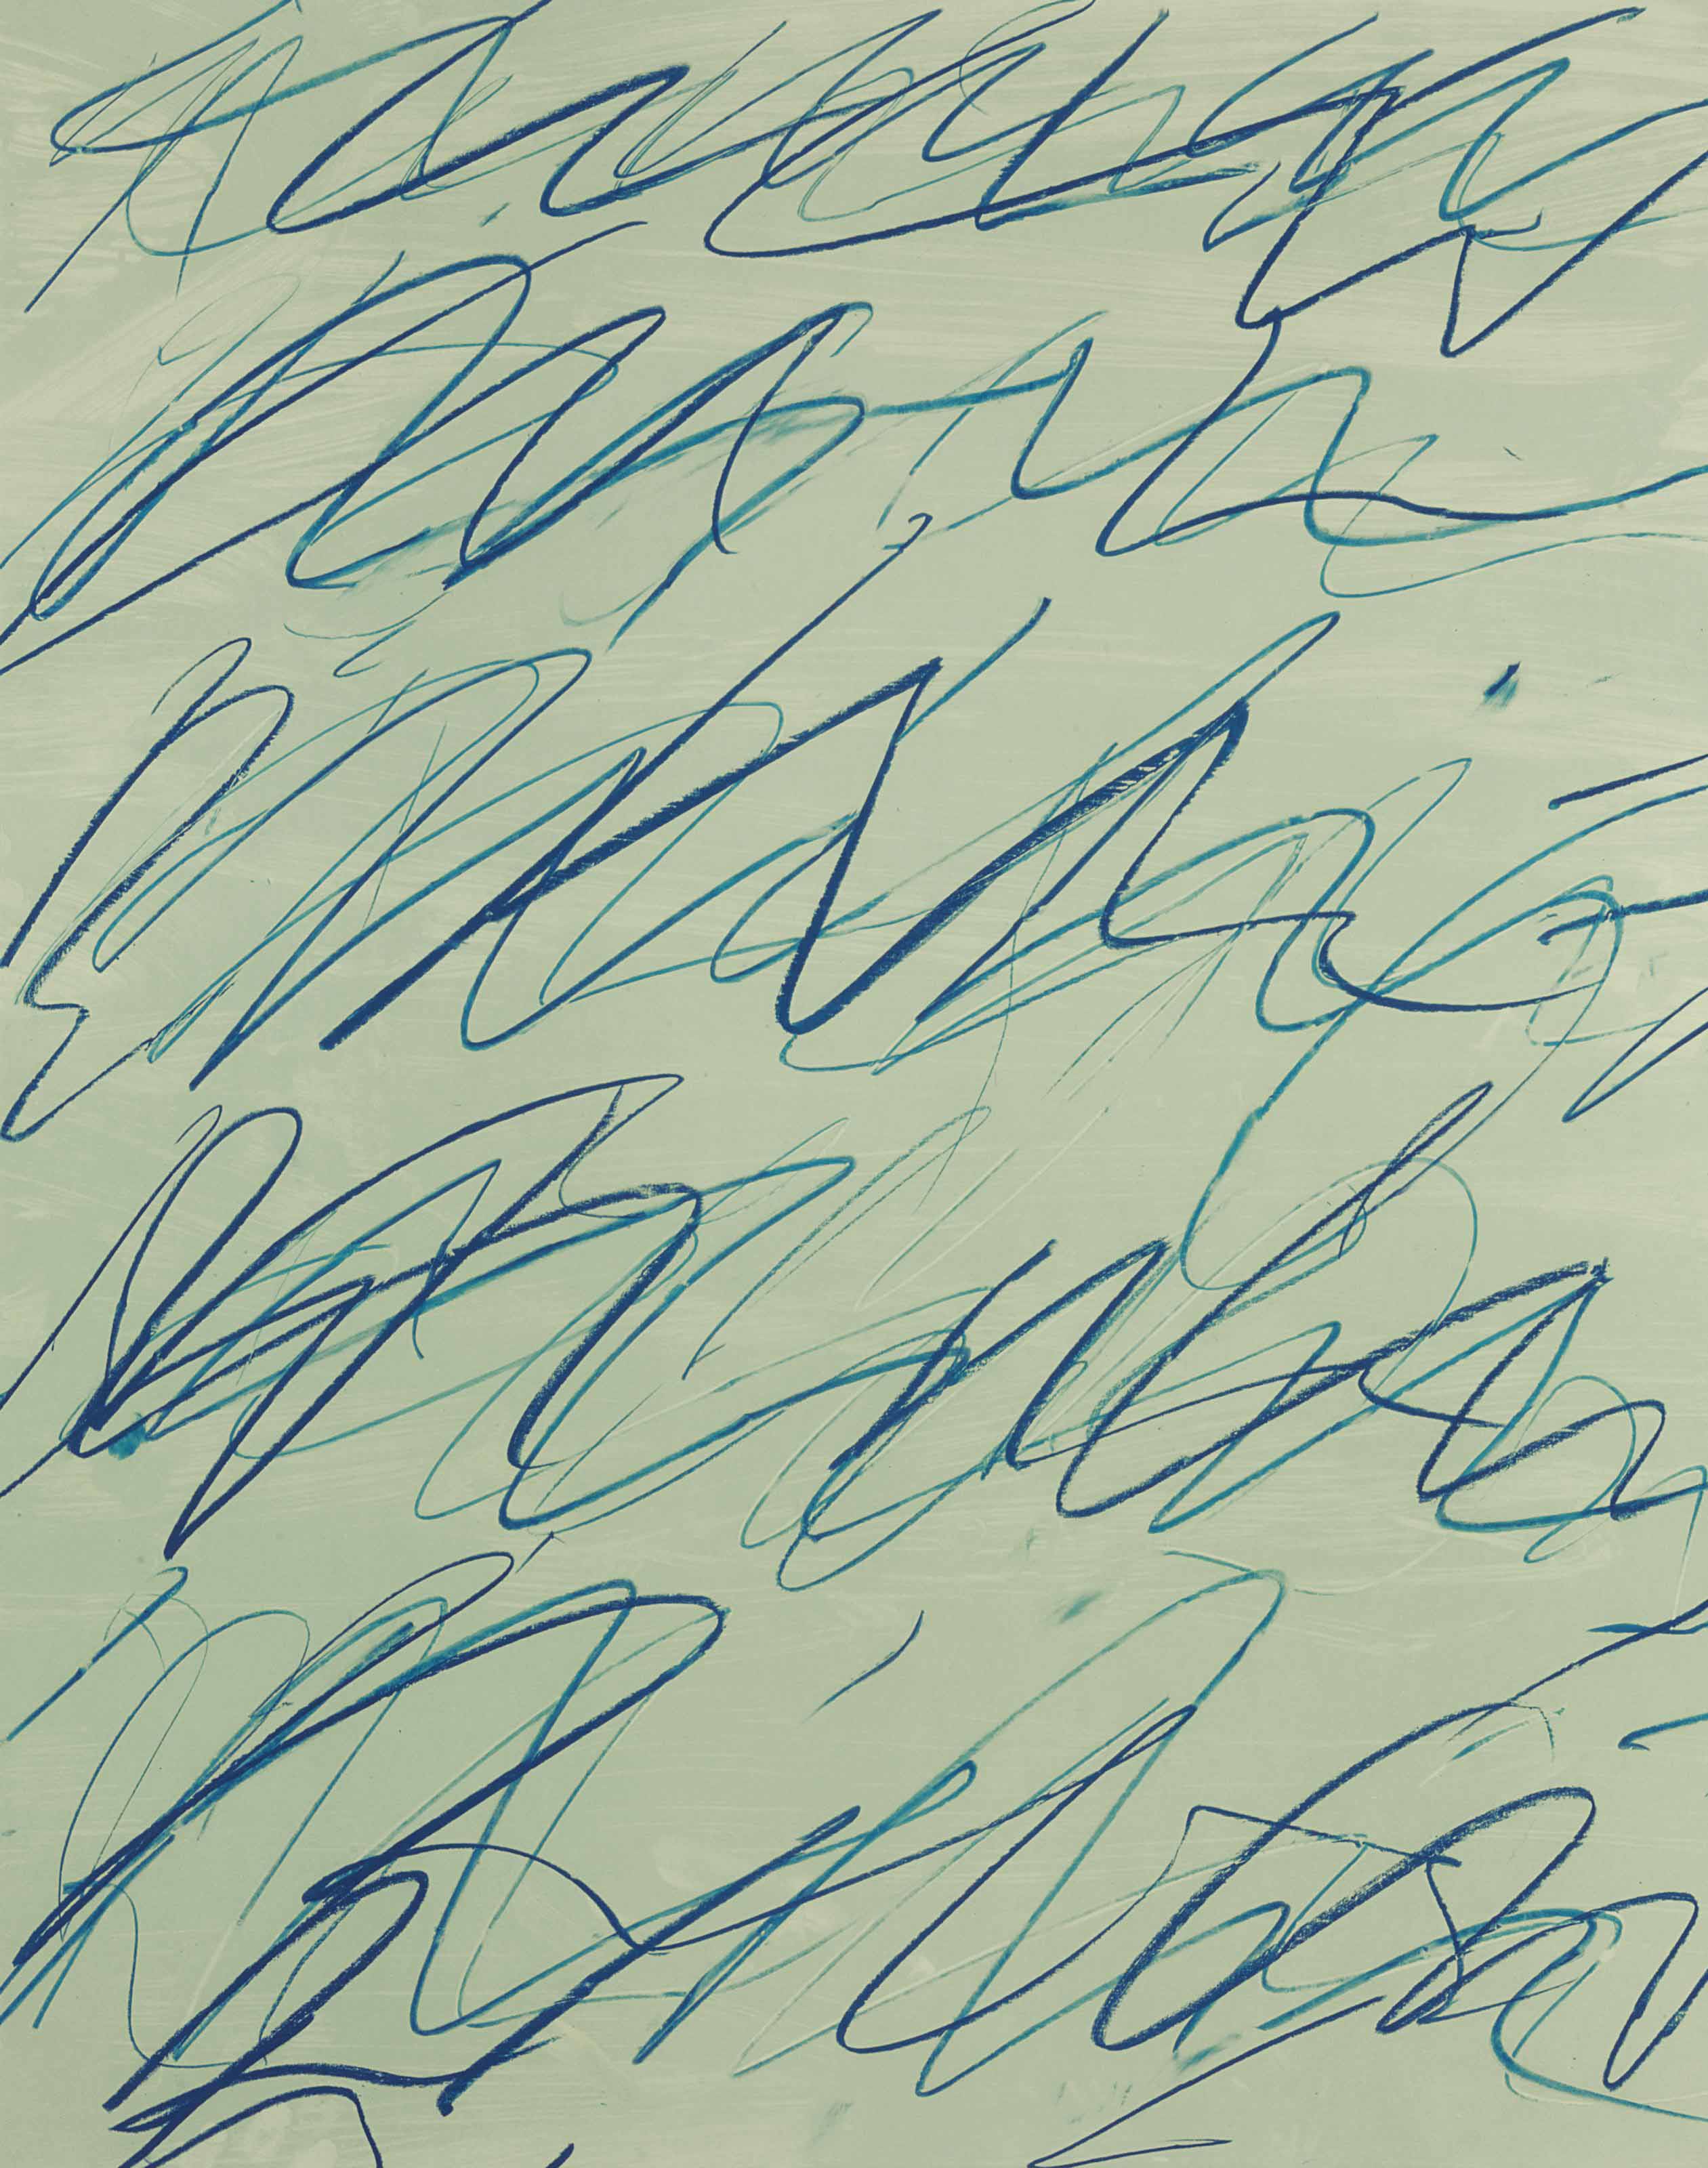 2014_NYR_02864_0120_000(cy_twombly_roman_notes_iii_from_roman_notes).jpg